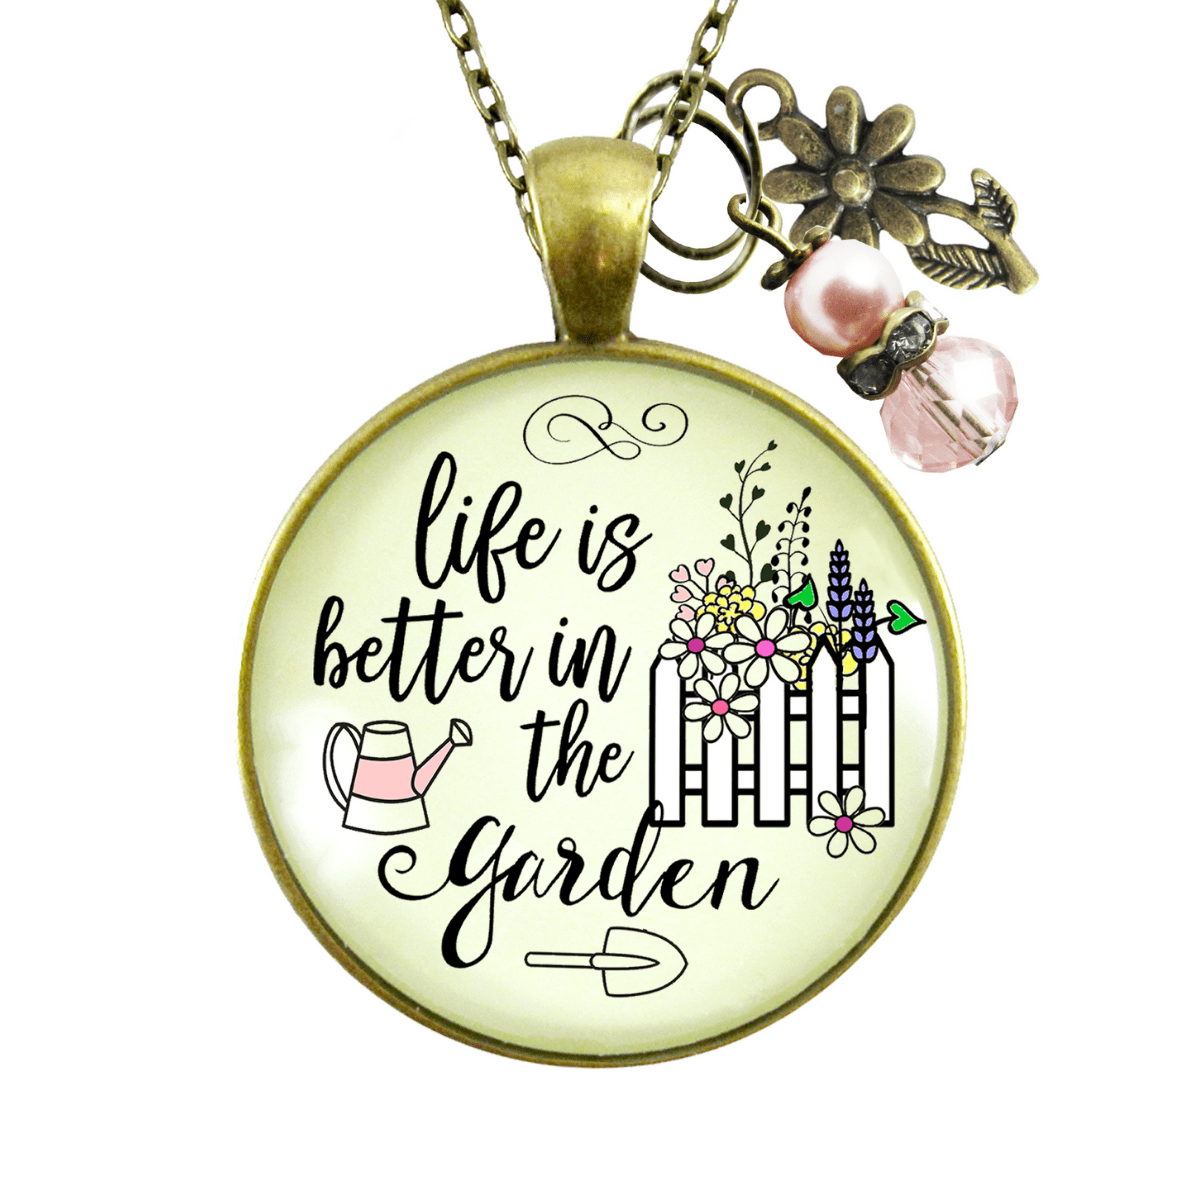 Gutsy Goodness Gardener Necklace Life is Better in Garden Womens Quote Gift Jewelry 24" - Gutsy Goodness;Gardener Necklace Life Is Better In Garden Womens Quote Gift Jewelry 24" - Gutsy Goodness Handmade Jewelry Gifts